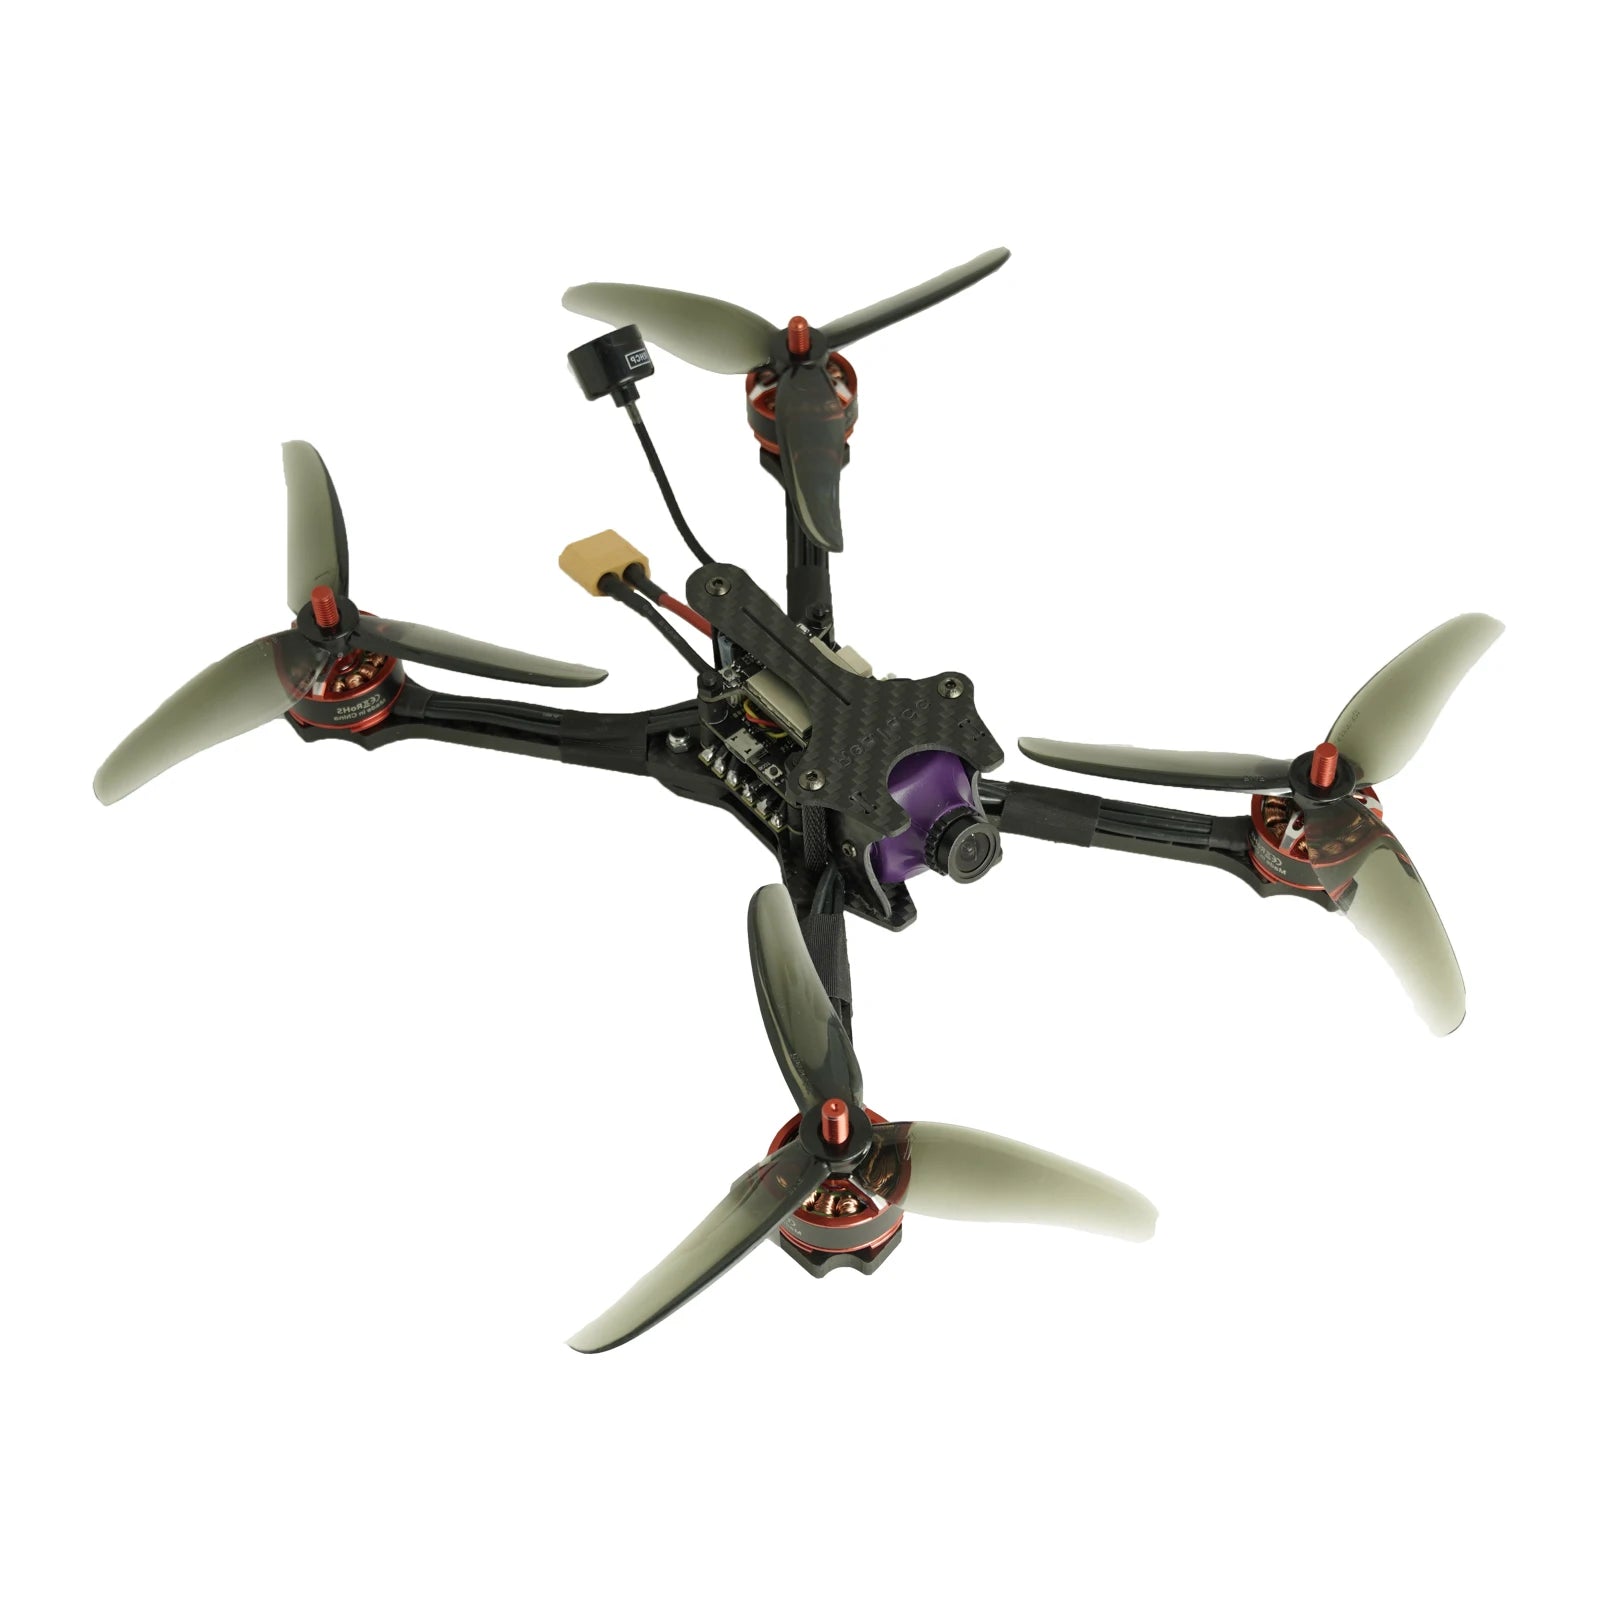 TCMMRC Xtreme 210 Racing Drone, the intuitive controller layout and ergonomic design offer a comfortable grip, enhancing the overall user experience